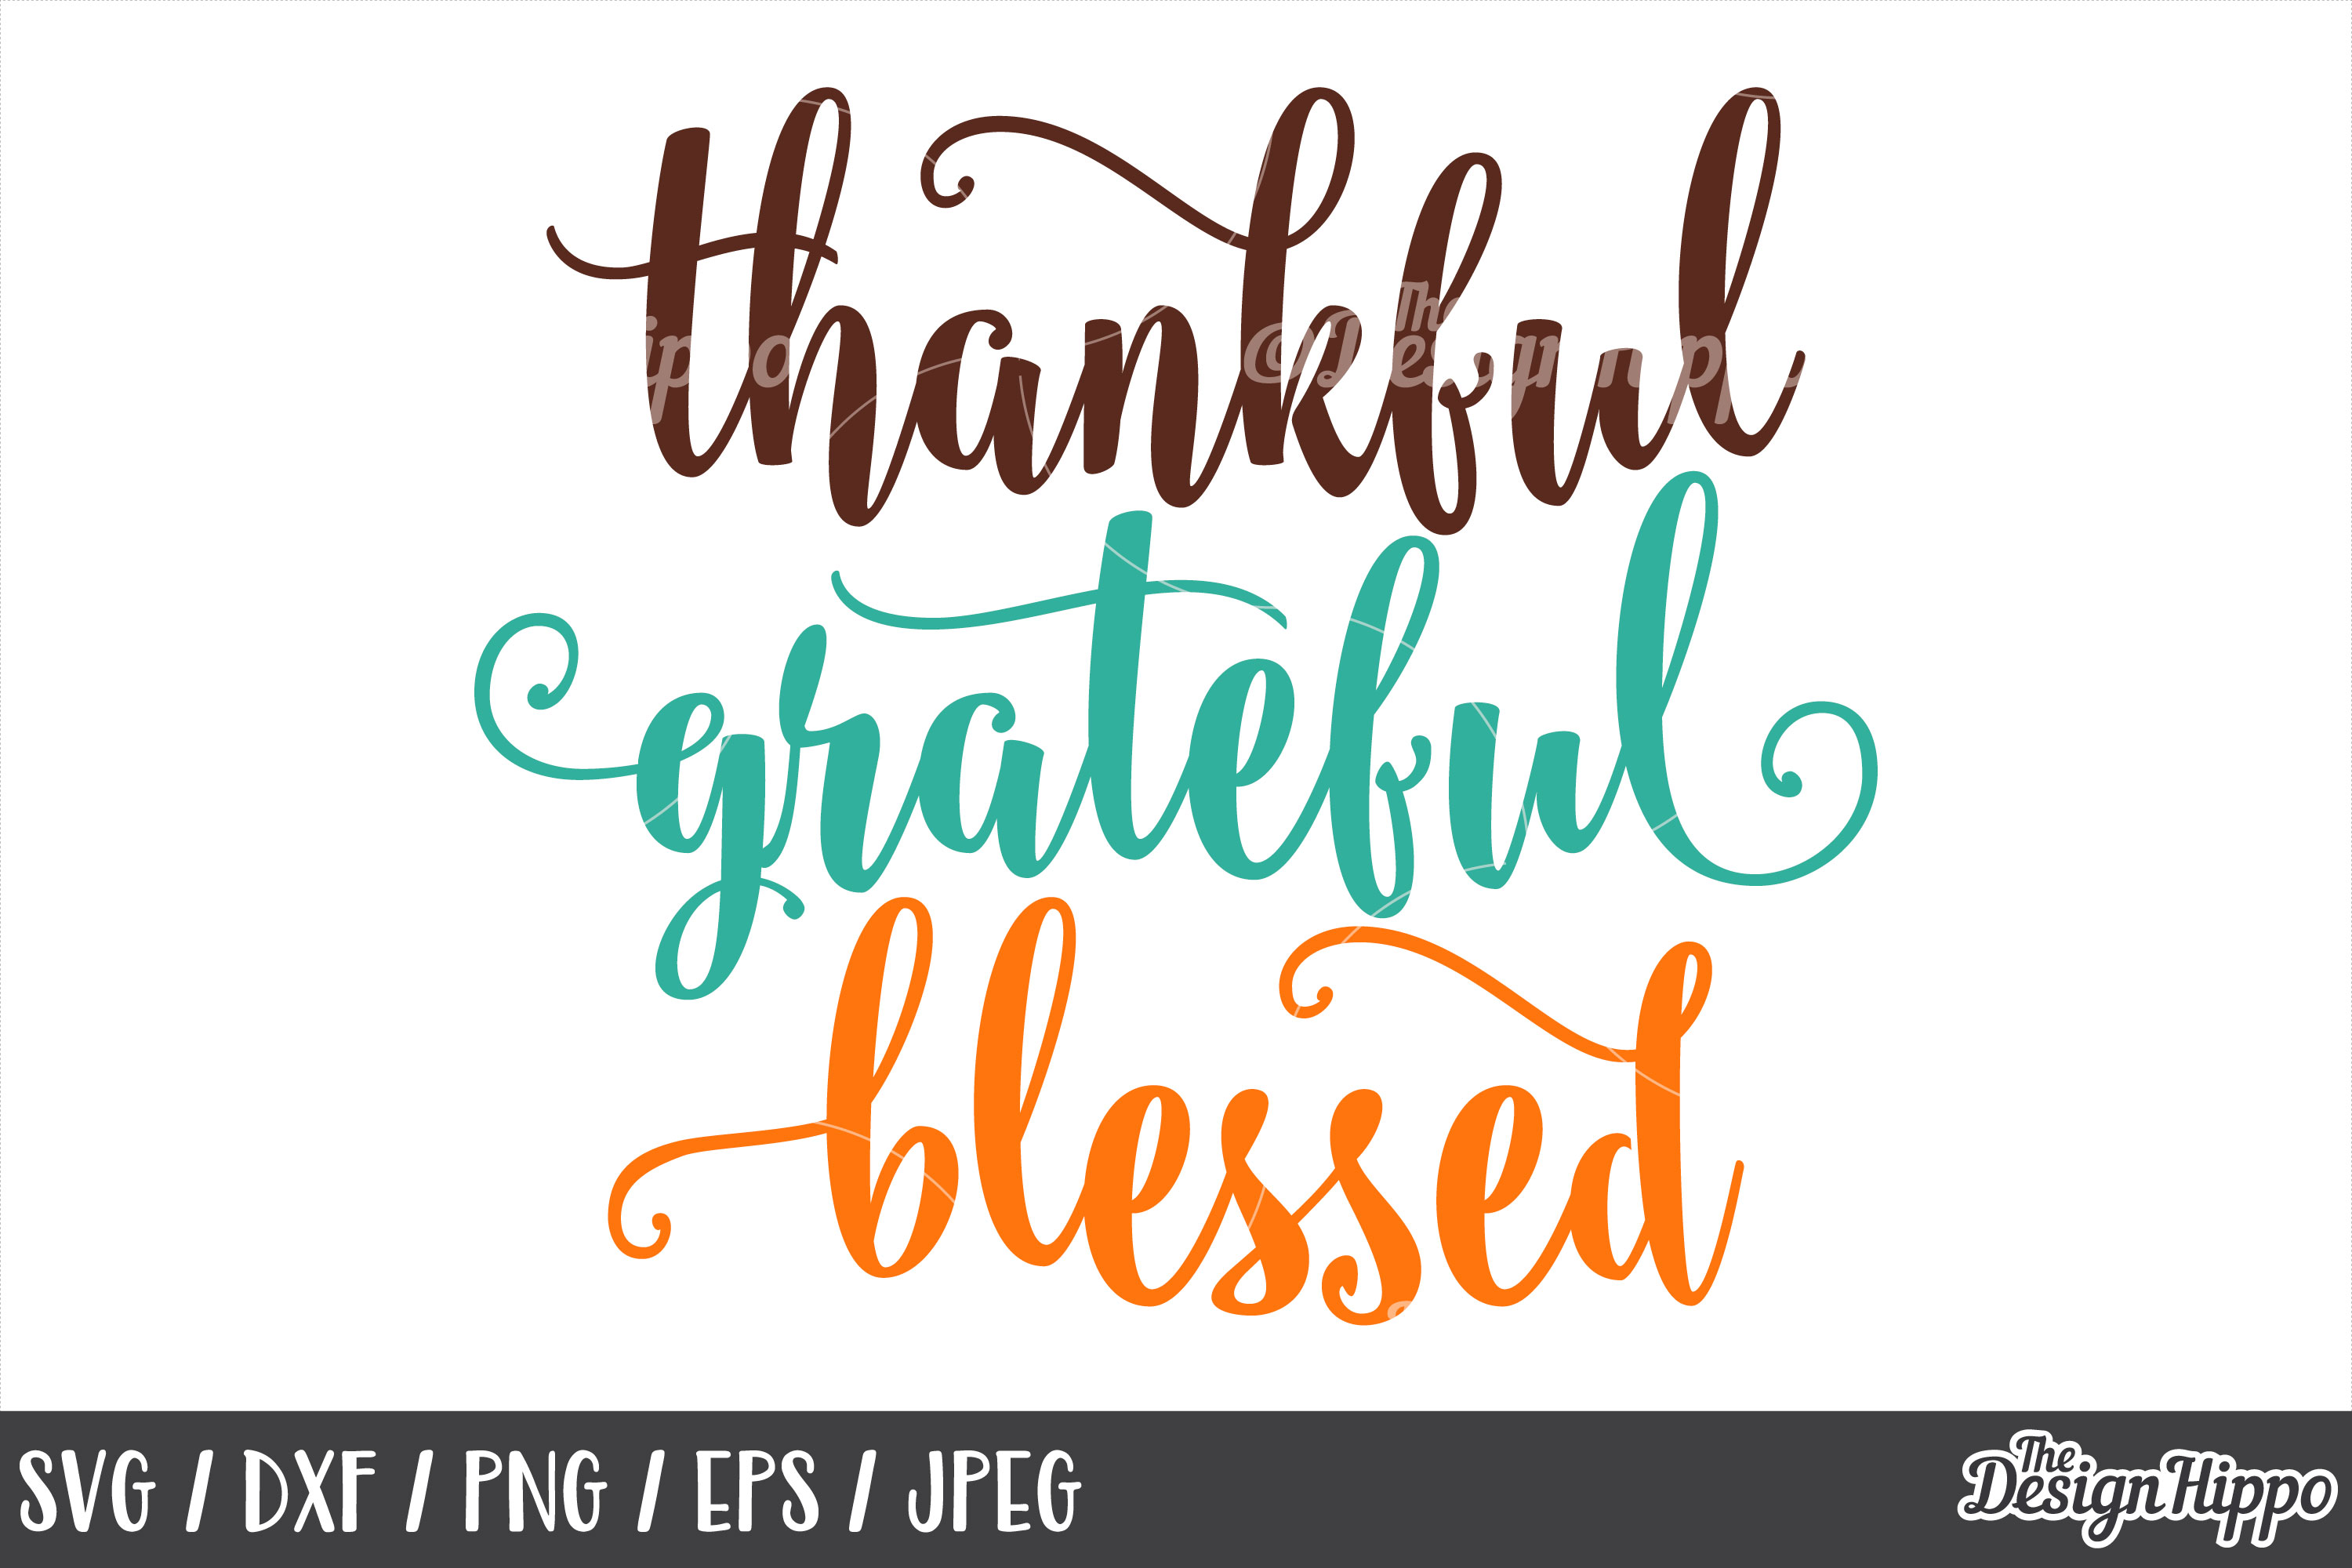 Thanksgiving, Thankful Grateful Blessed SVG, PNG, DXF, Files